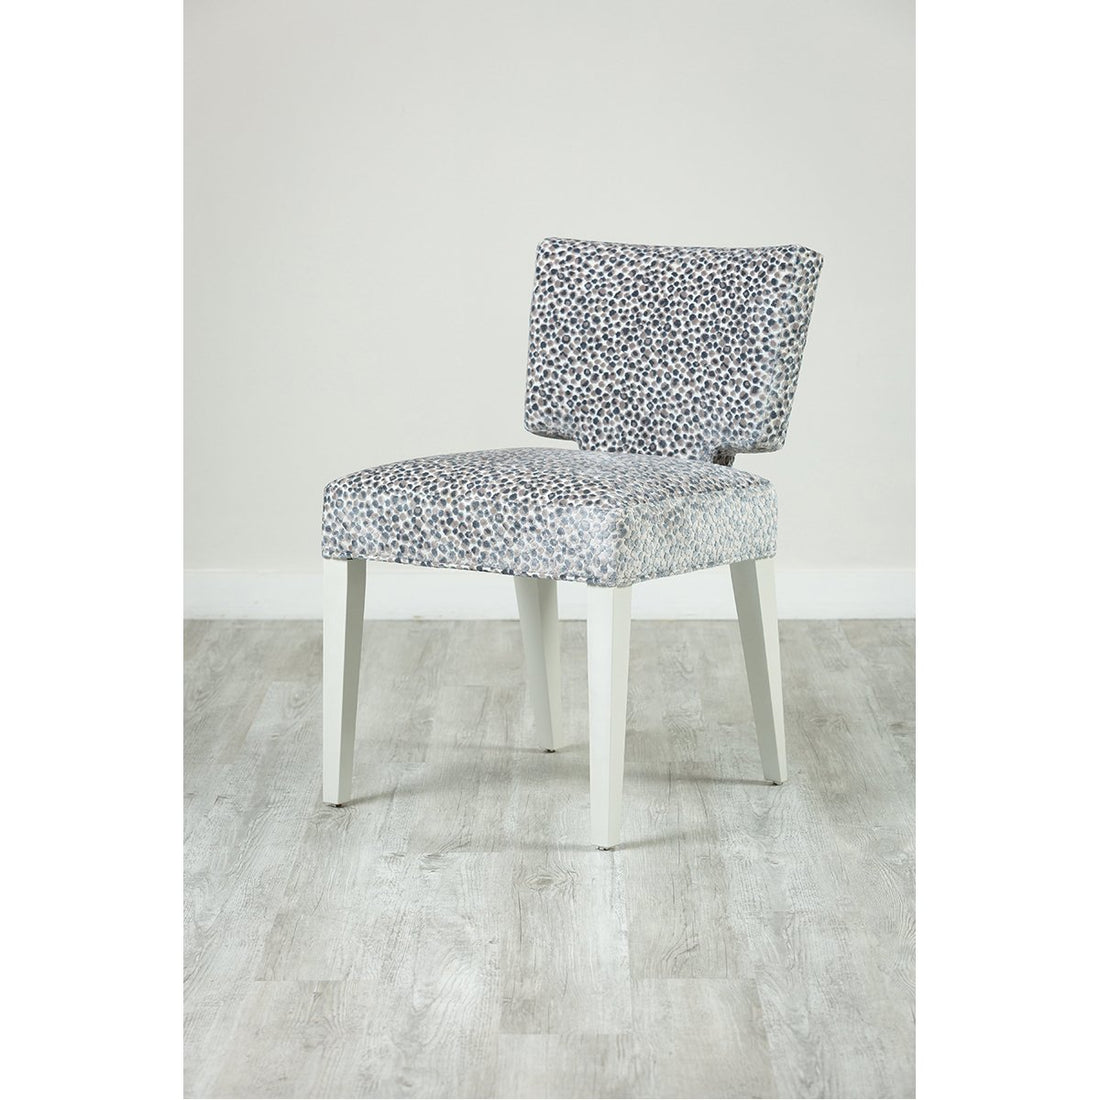 Belle Meade Signature Aniston Dining Chair without Handle